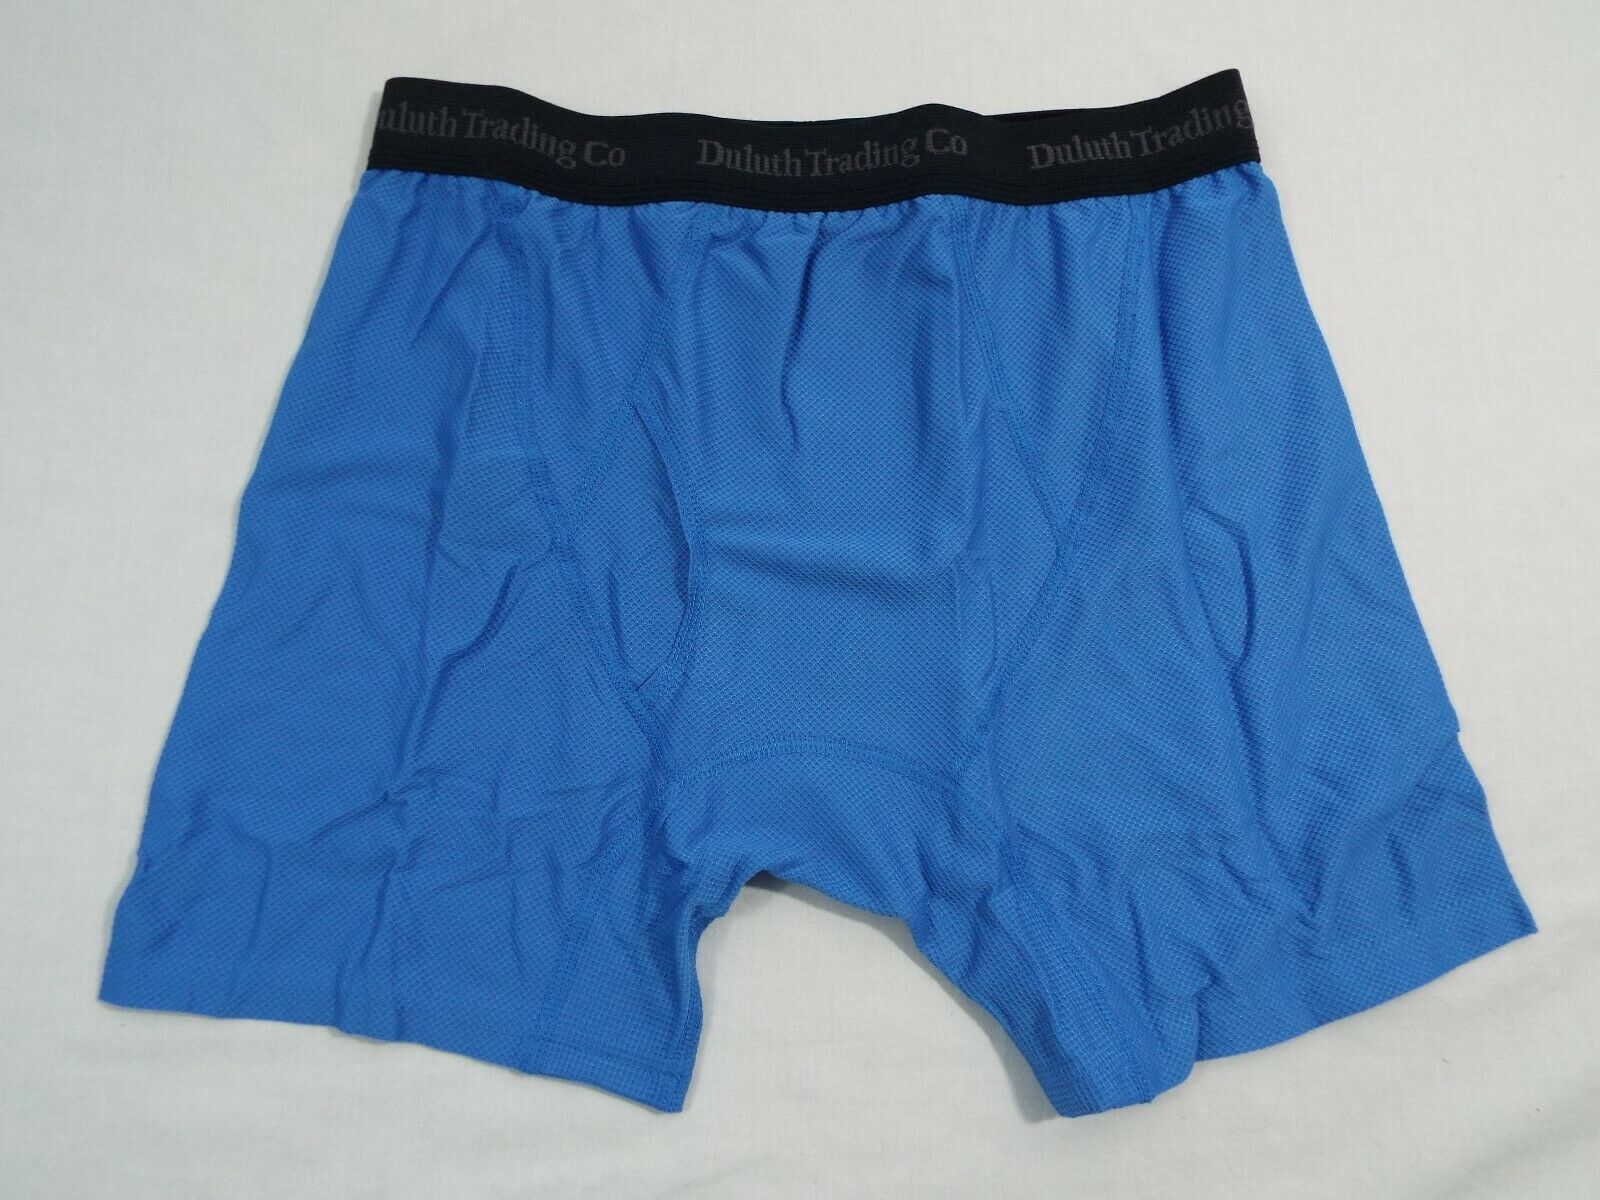 1 Pair Duluth Trading Co Buck Naked Boxer Briefs Yosemite Blue 76015 ...